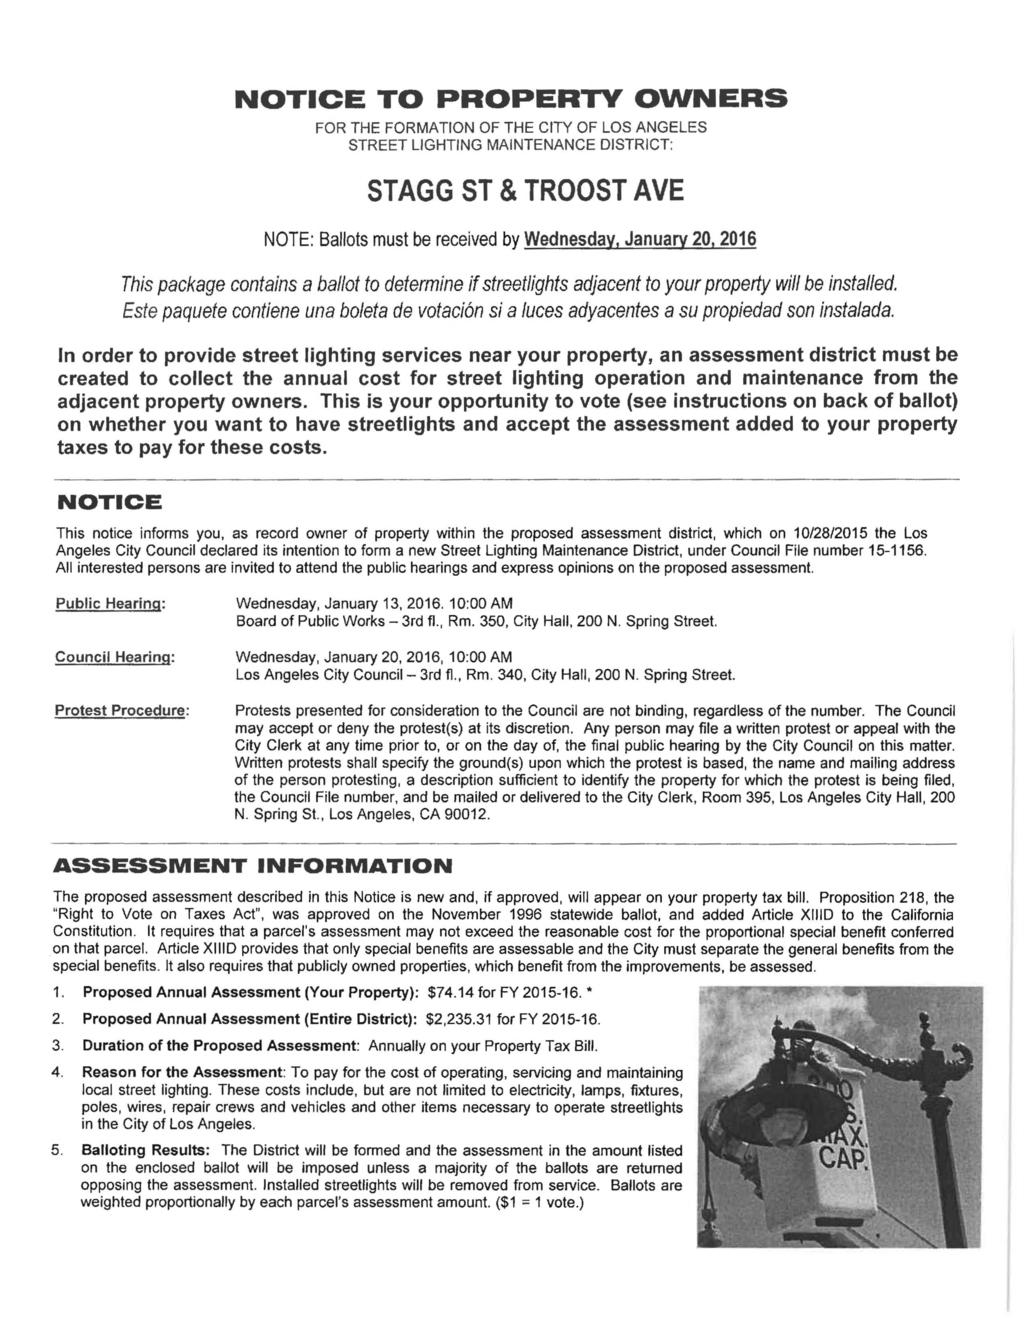 NOTICE TO PROPERTY OWNERS FOR THE FORMATION OF THE CITY OF LOS ANGELES STREET LIGHTING MAINTENANCE DISTRICT: STAGG ST & TROOST AVE NOTE: Ballots must be received by Wednesday, January 2,216 This